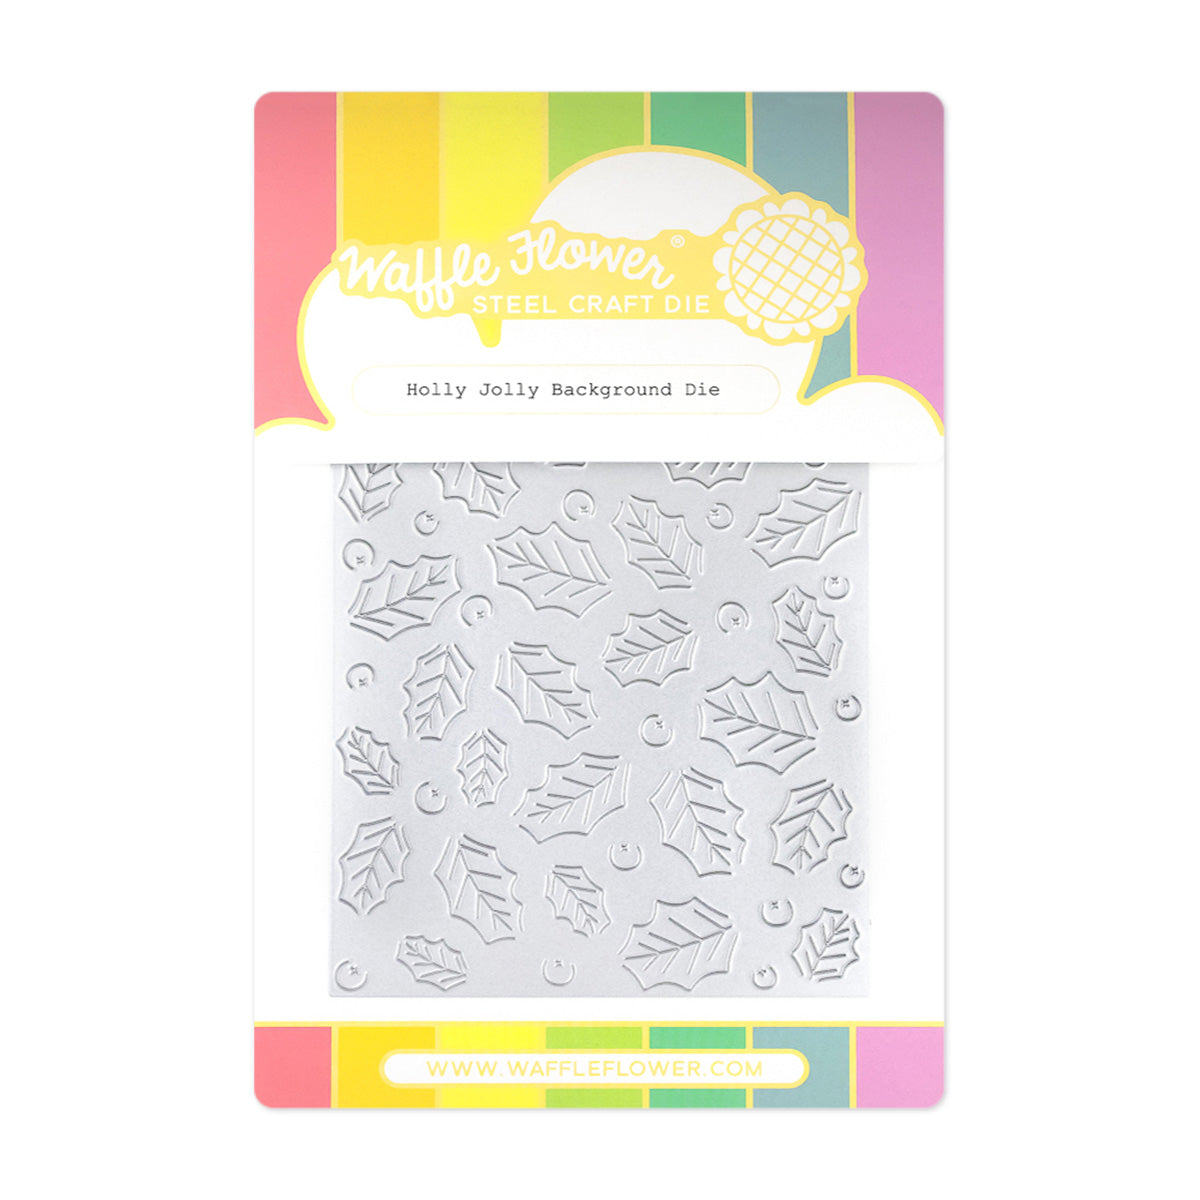 Waffle Flower Holly Jolly Background Die and Stencil Combo